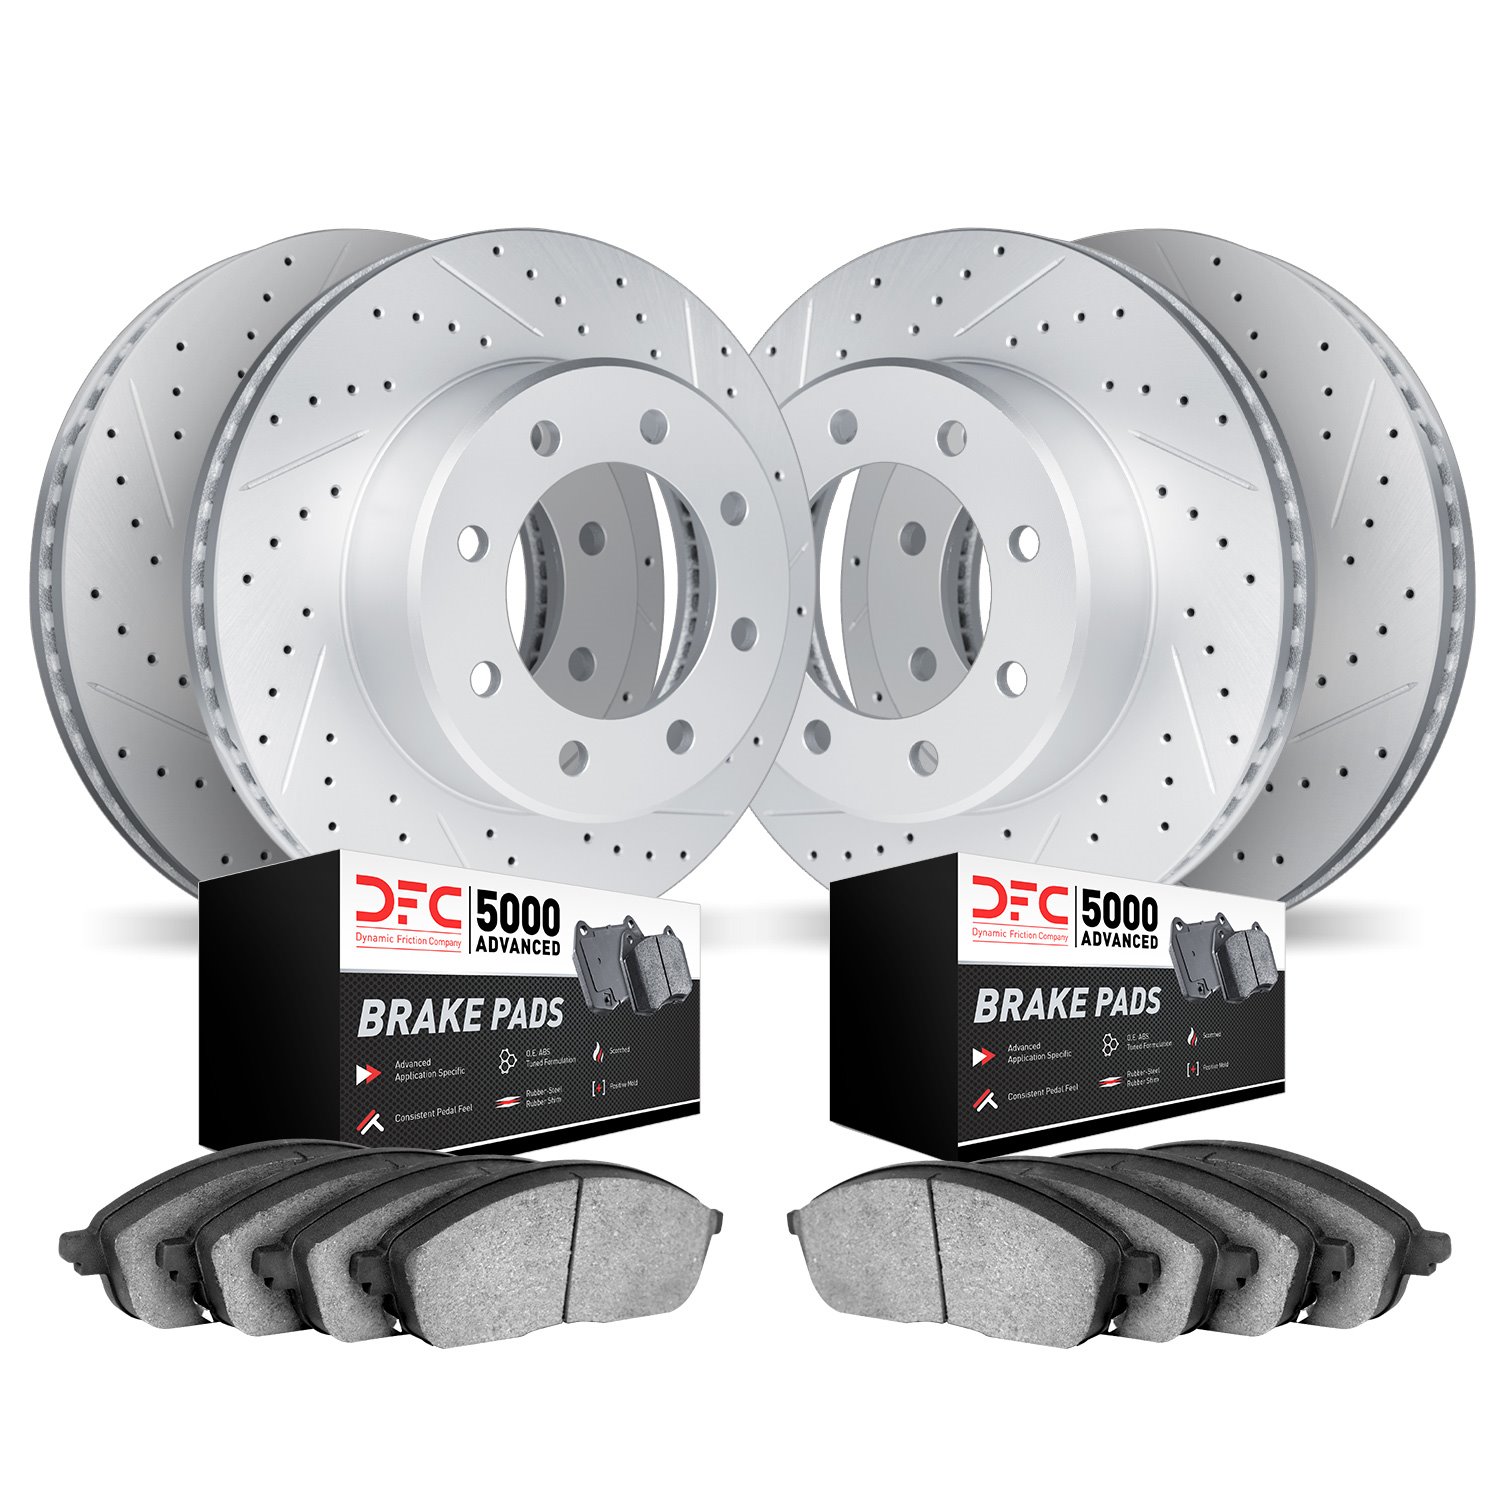 2504-54250 Geoperformance Drilled/Slotted Rotors w/5000 Advanced Brake Pads Kit, 1999-2004 Ford/Lincoln/Mercury/Mazda, Position: